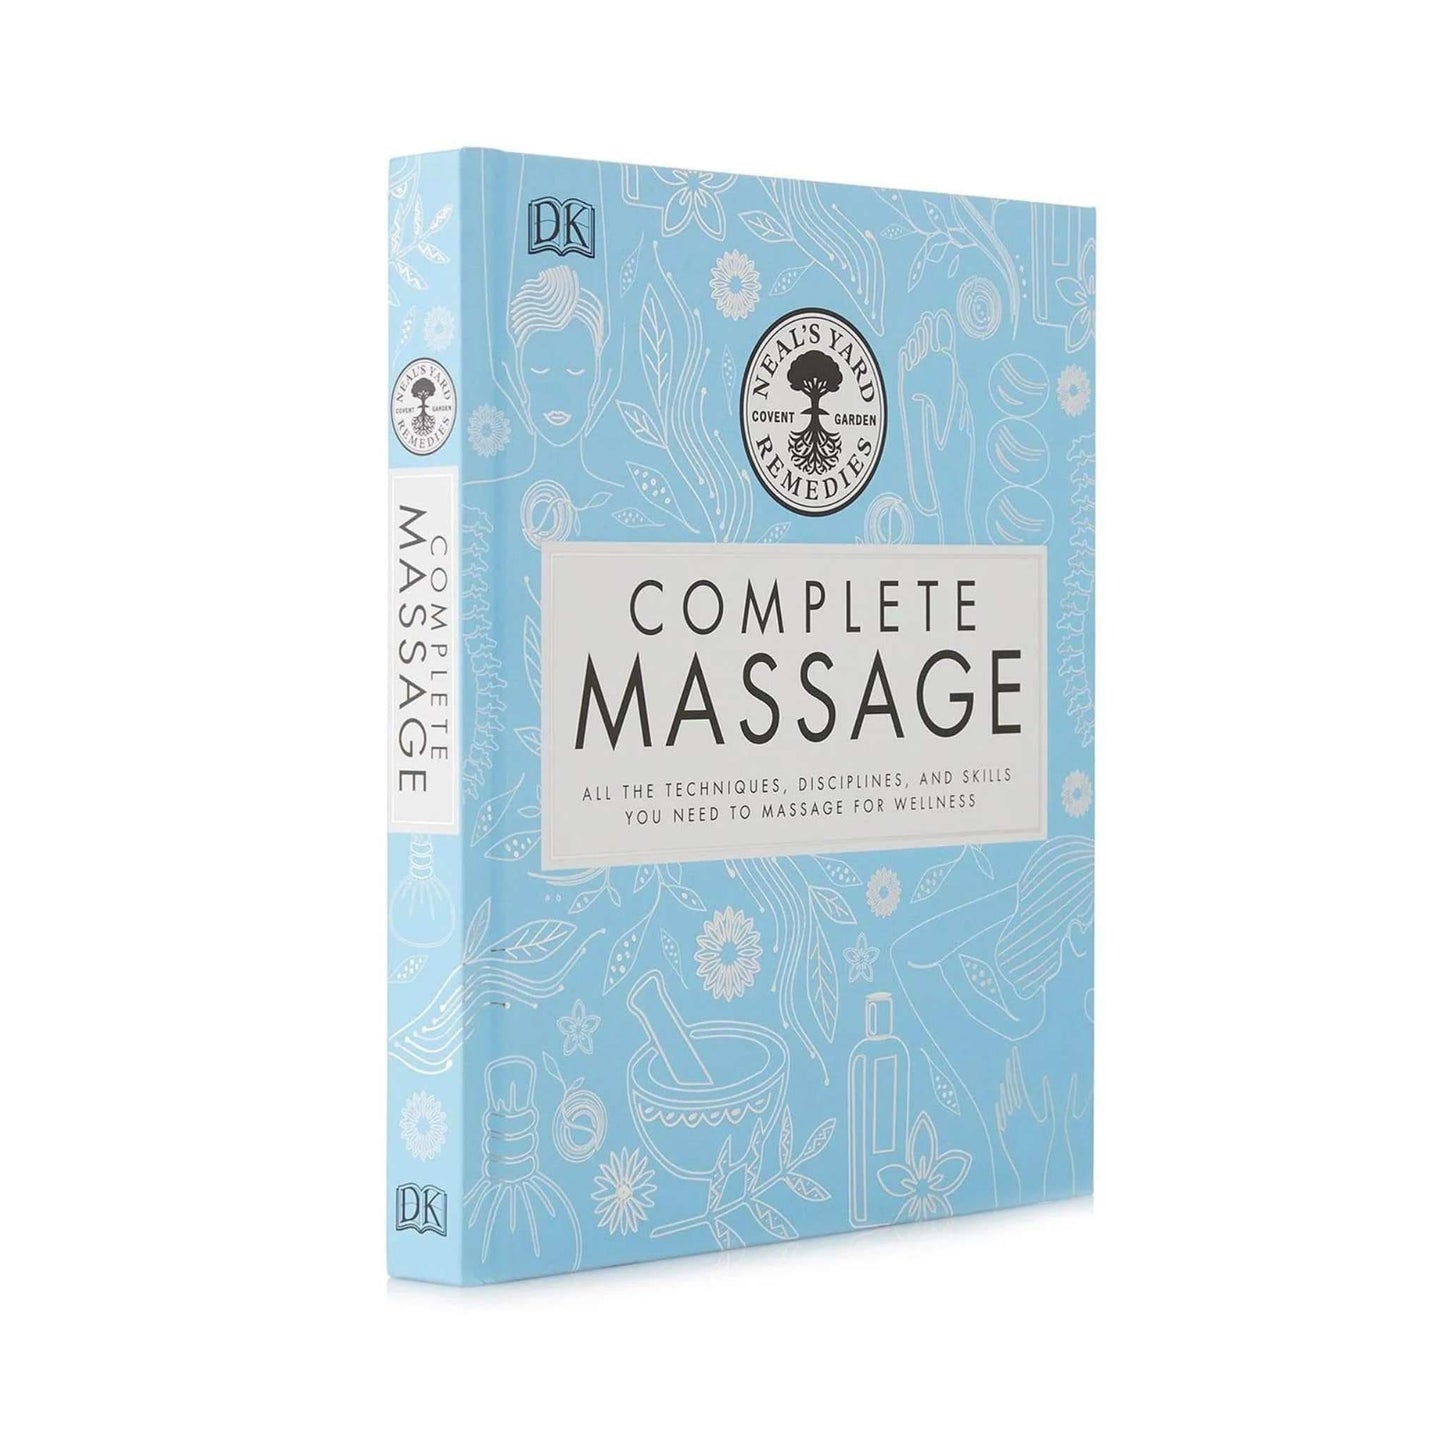 Our Bookshelf Print Books Neal's Yard Remedies Complete Massage -  All the Techniques, Disciplines, and Skills you need to Massage for Wellness